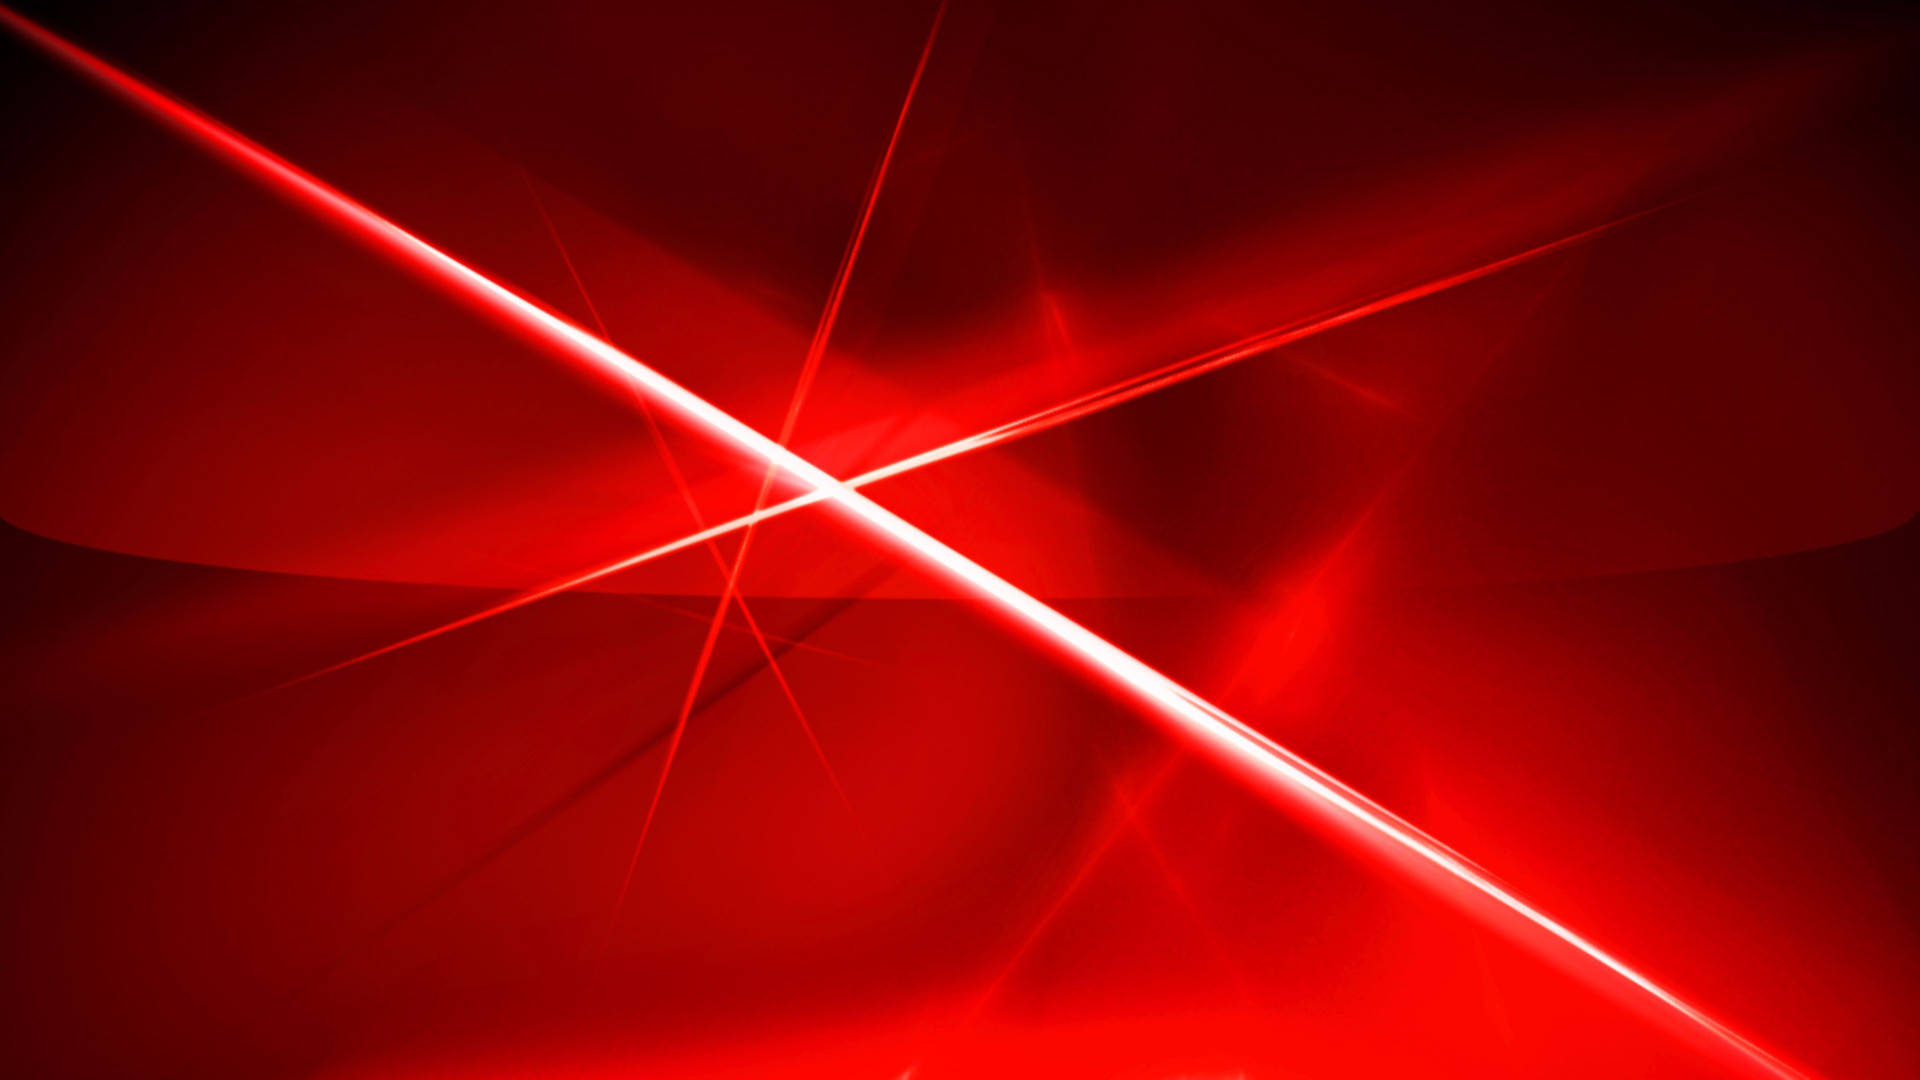 Glowing Red Abstract Art Wallpaper